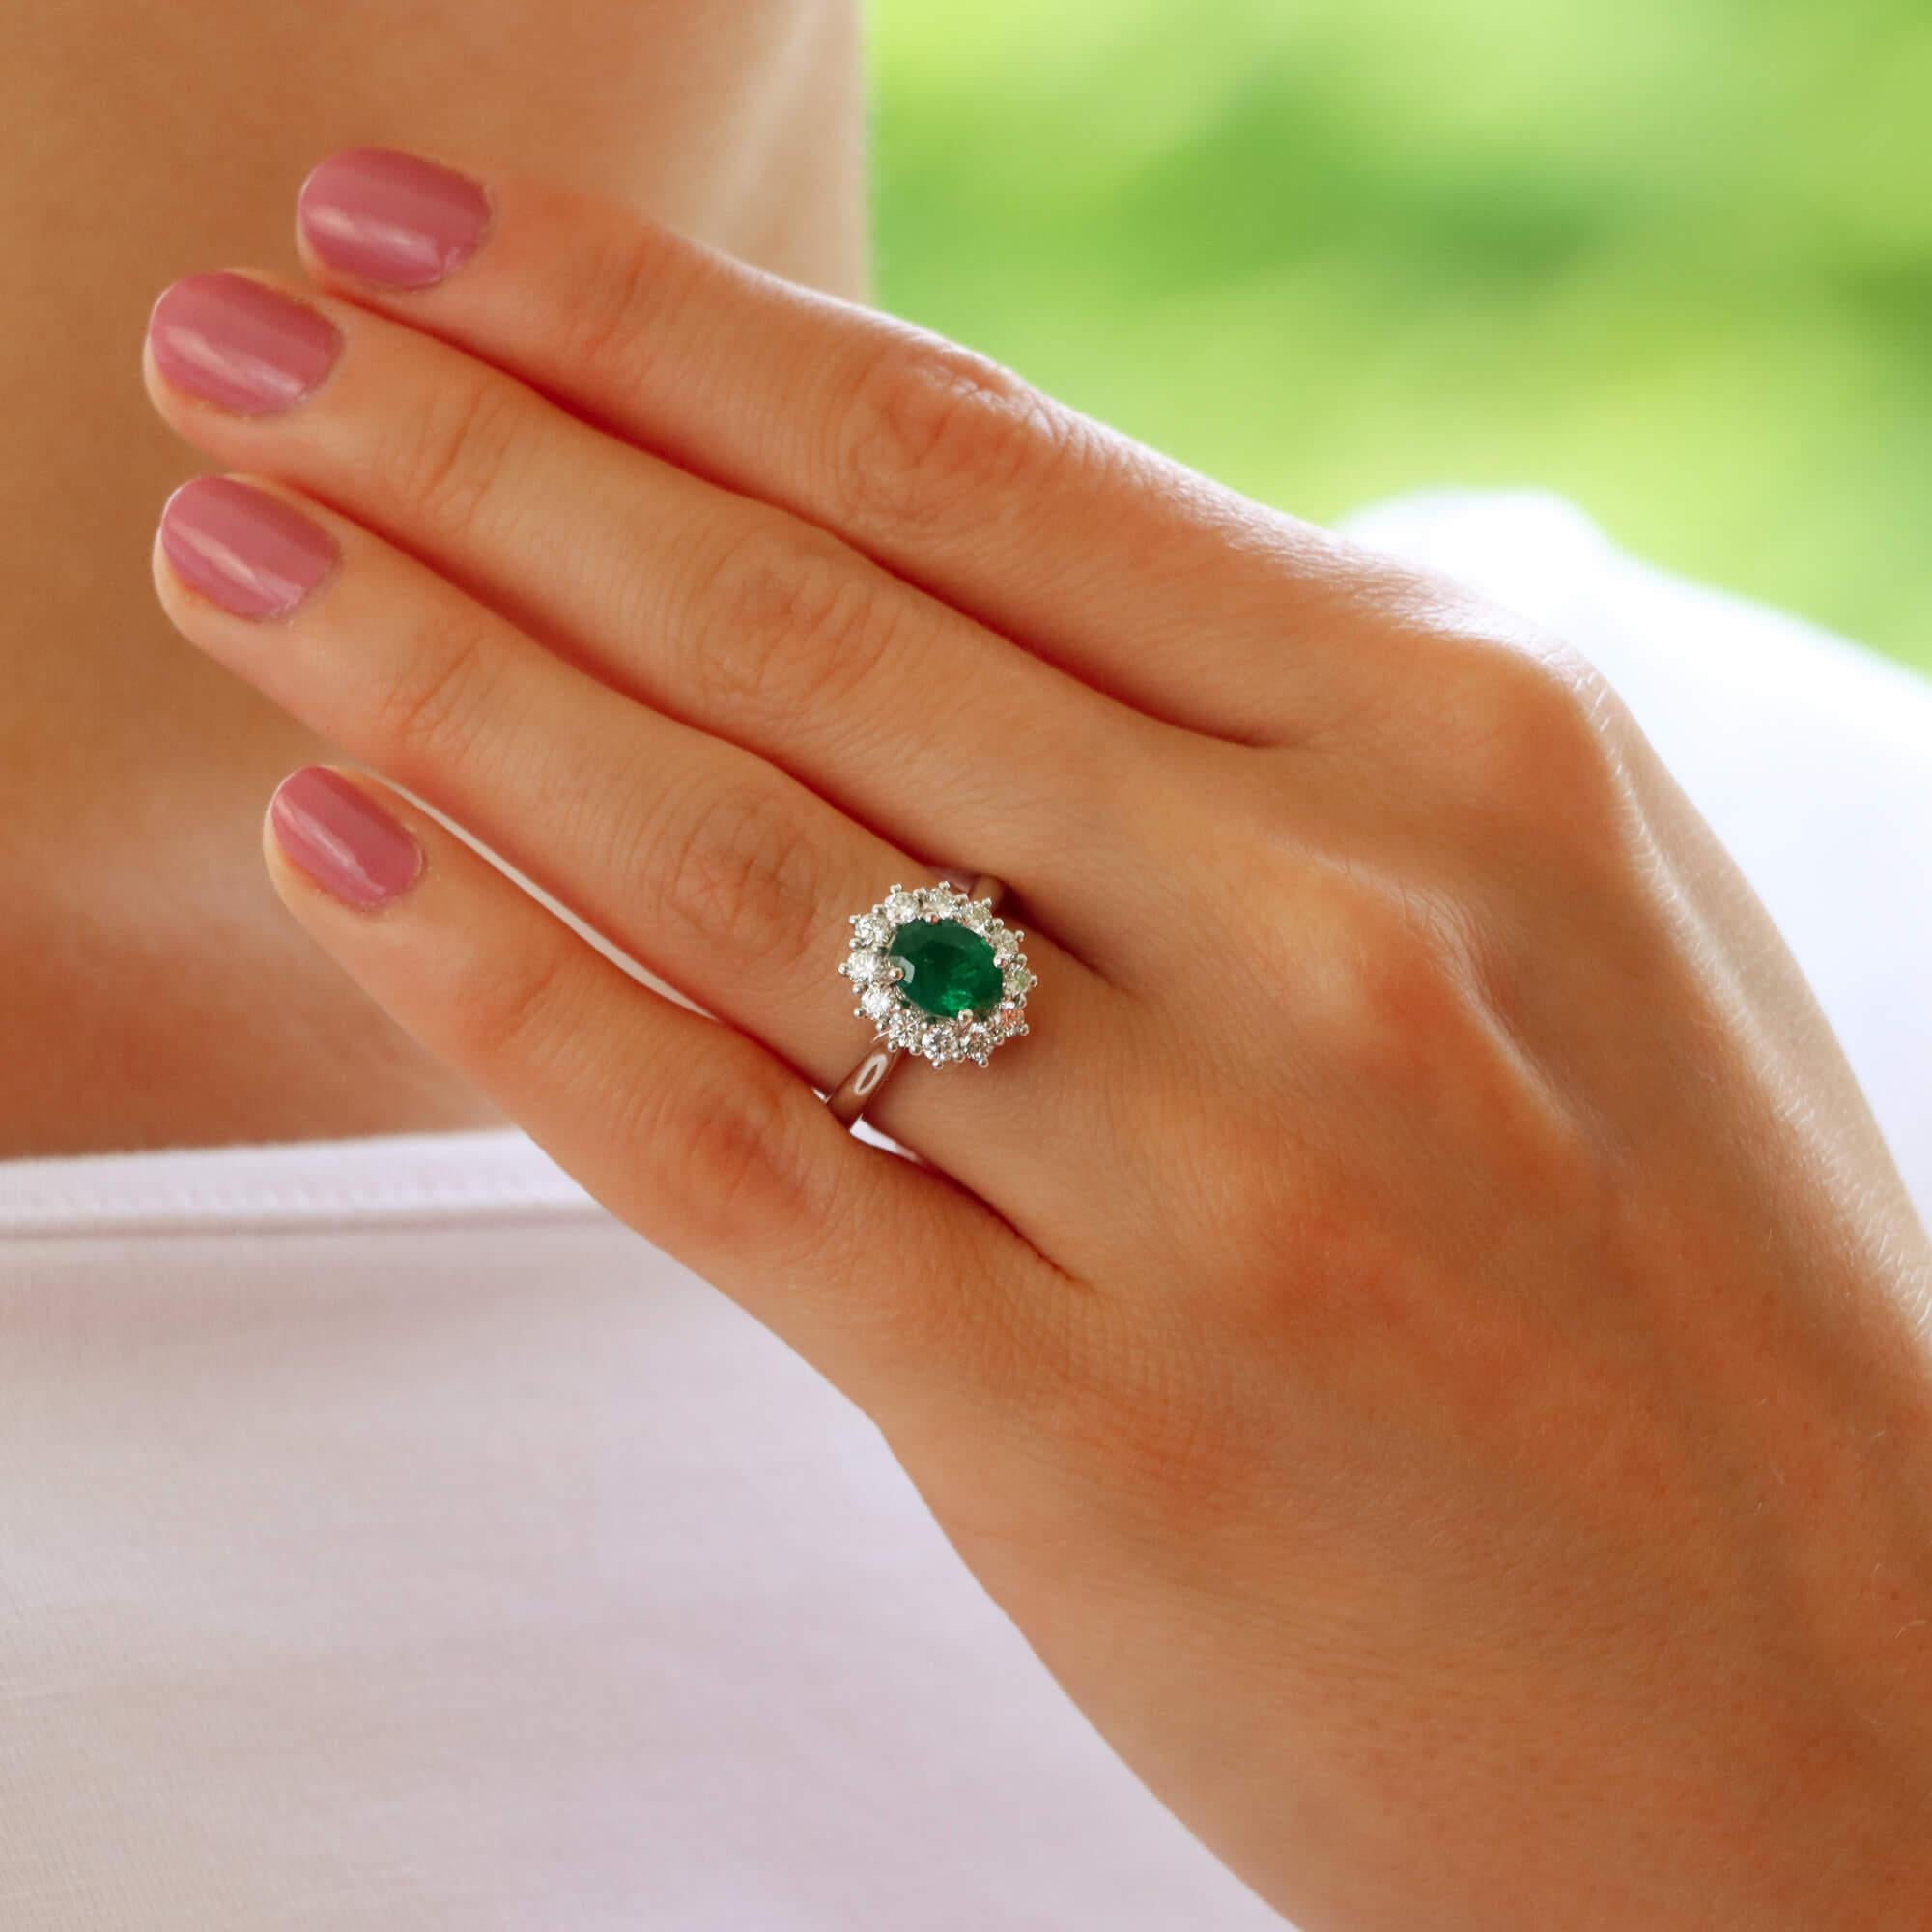 A beautiful emerald and diamond cluster ring set in platinum.

The piece is centrally set with a vibrant oval cut emerald which is four claw set in platinum. The emerald has a fantastic vibrant green colour to it and is surrounded by 12 round